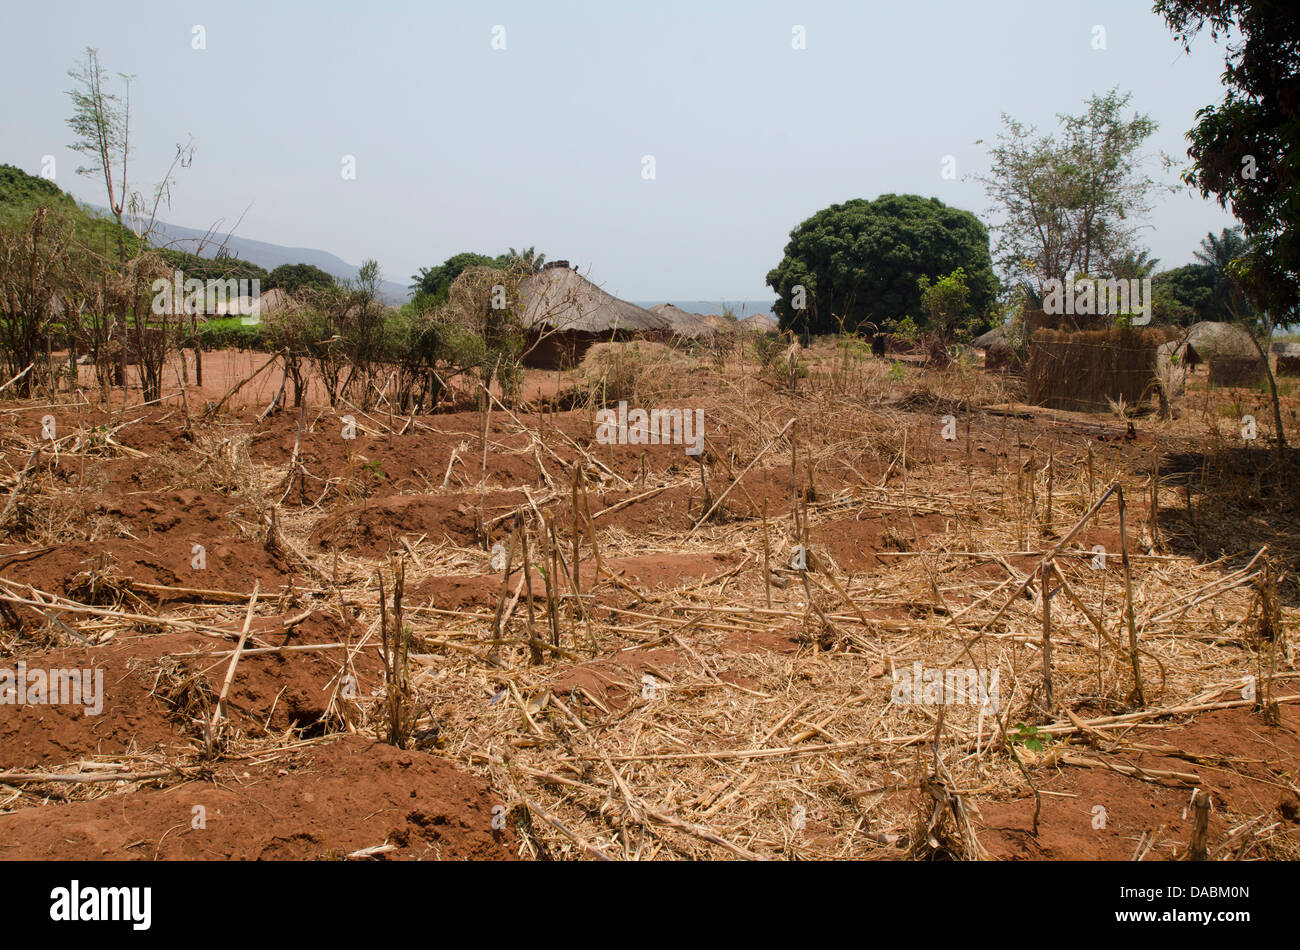 Dry crops in a village in Africa, Talpia, Zambia, Africa Stock Photo